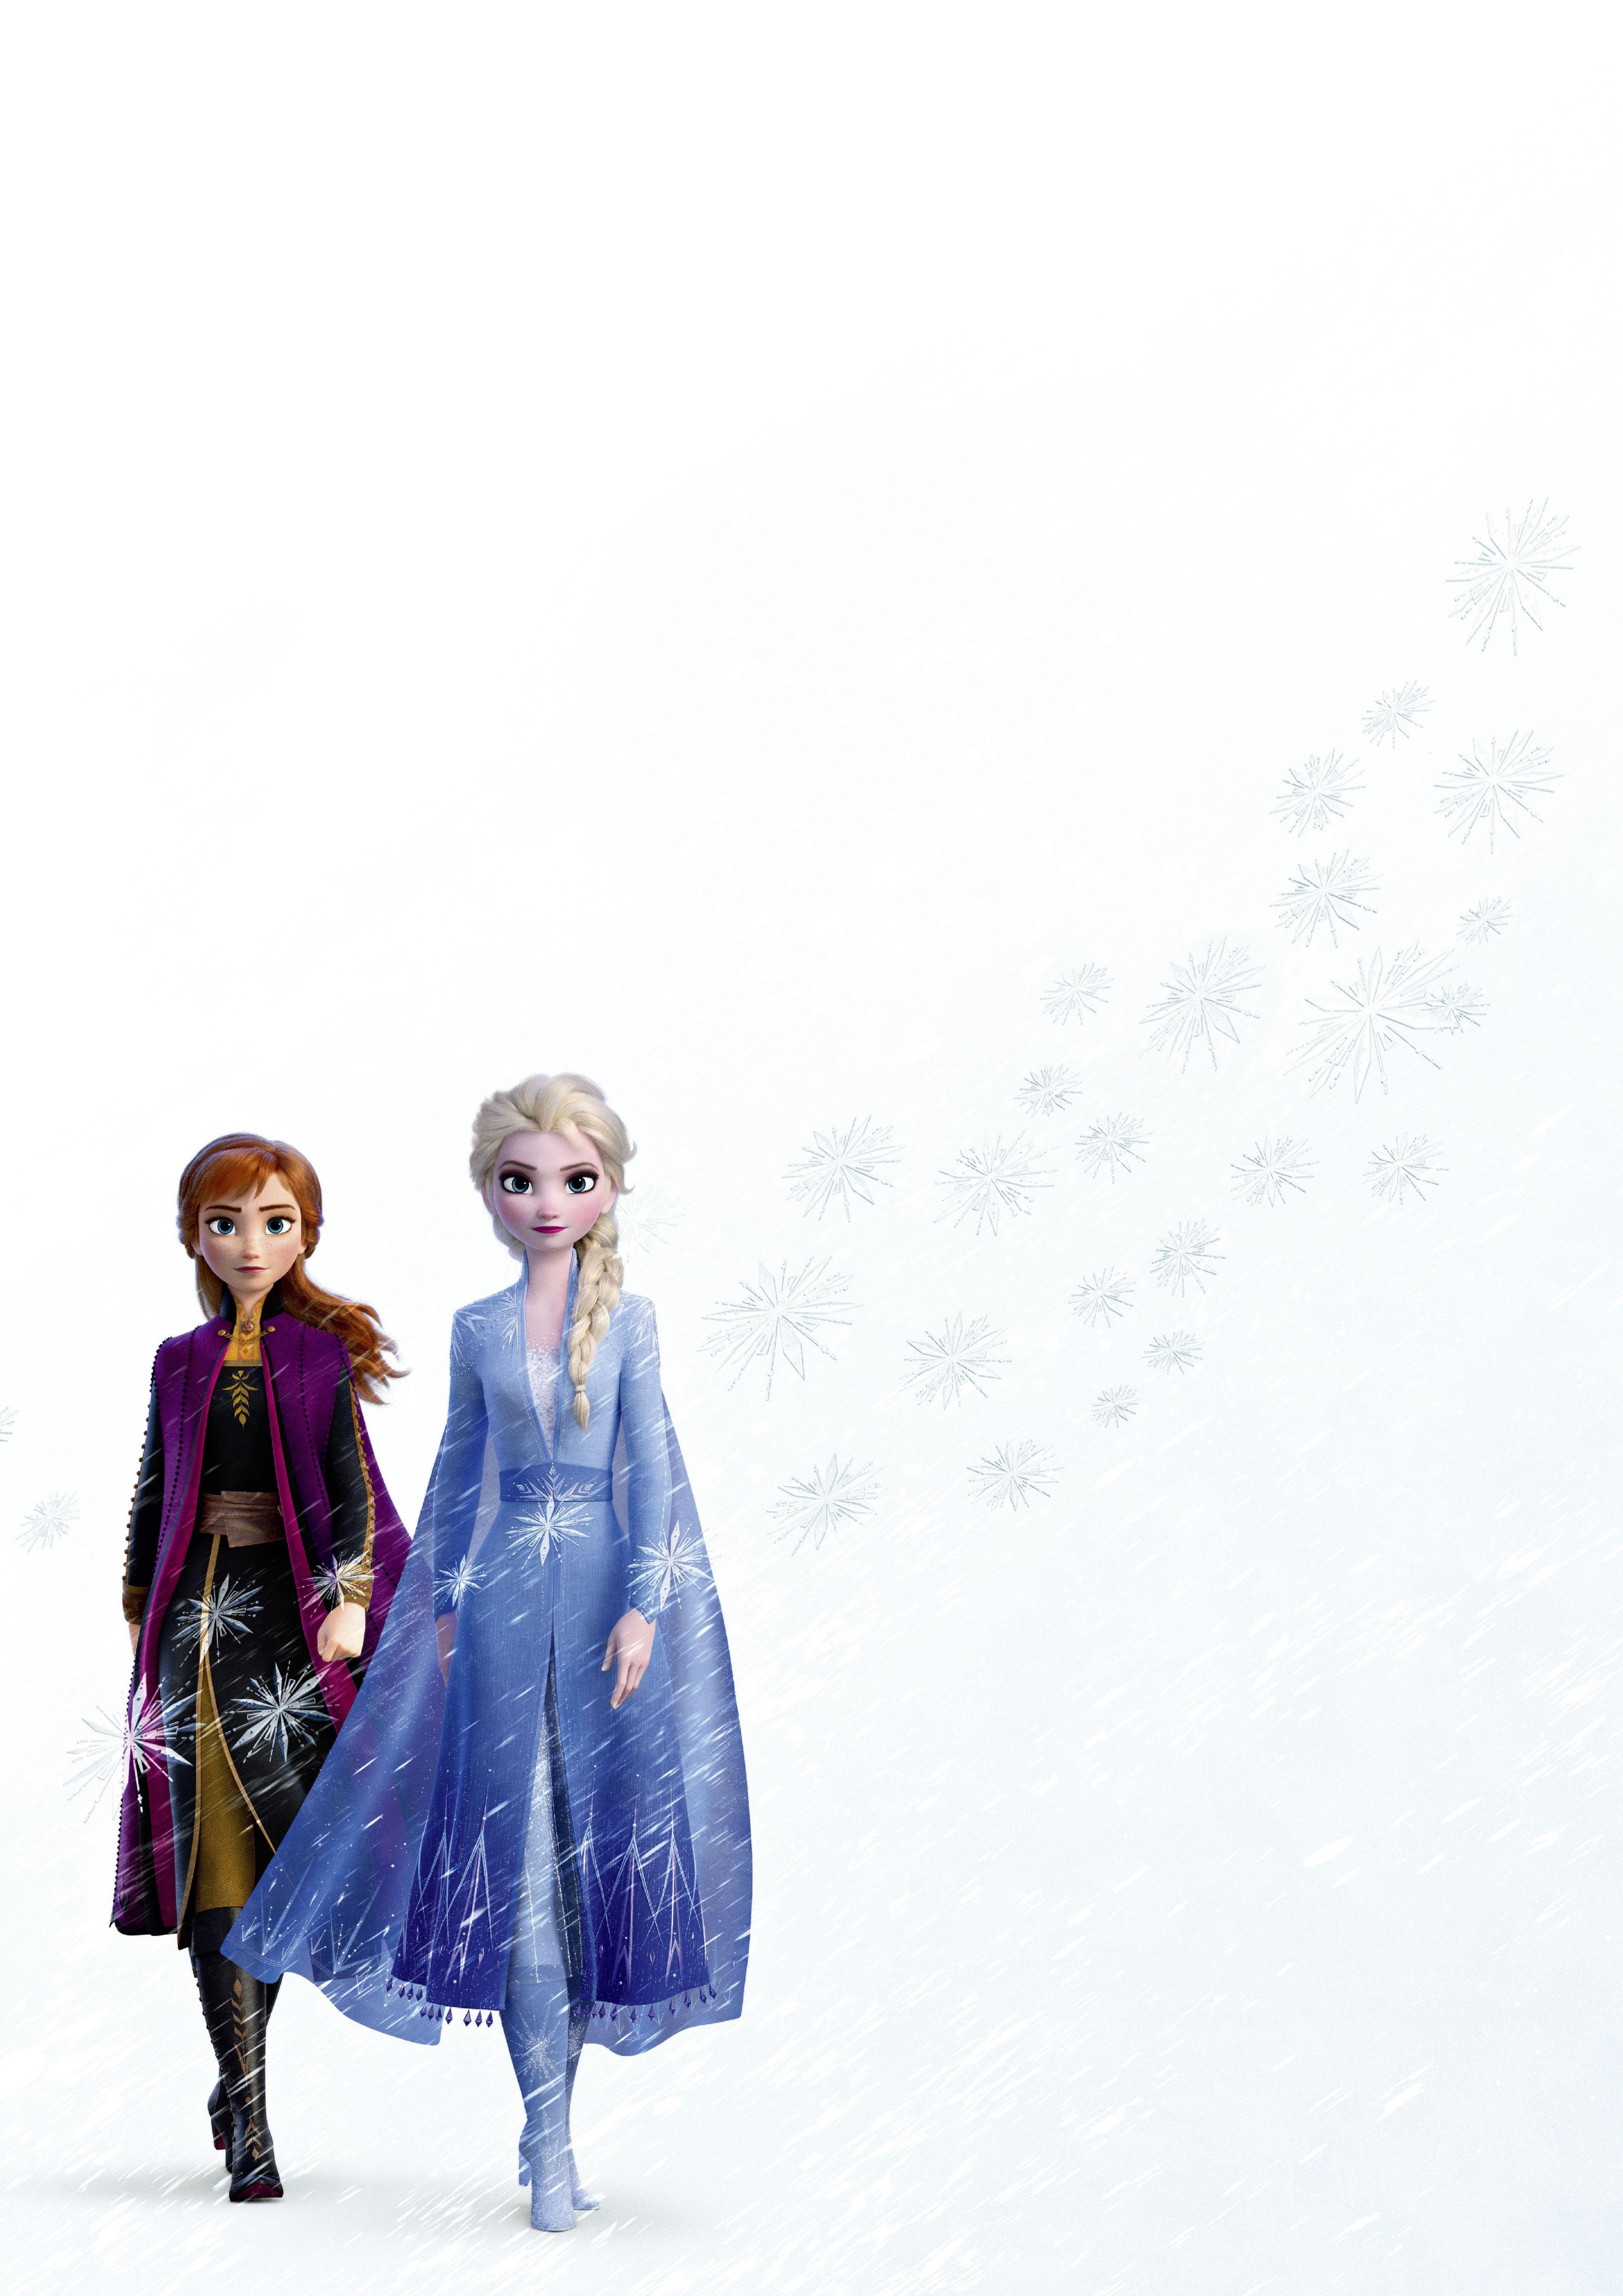 Elsa and Anna In Frozen 2 Movie Wallpaper, HD Movies 4K